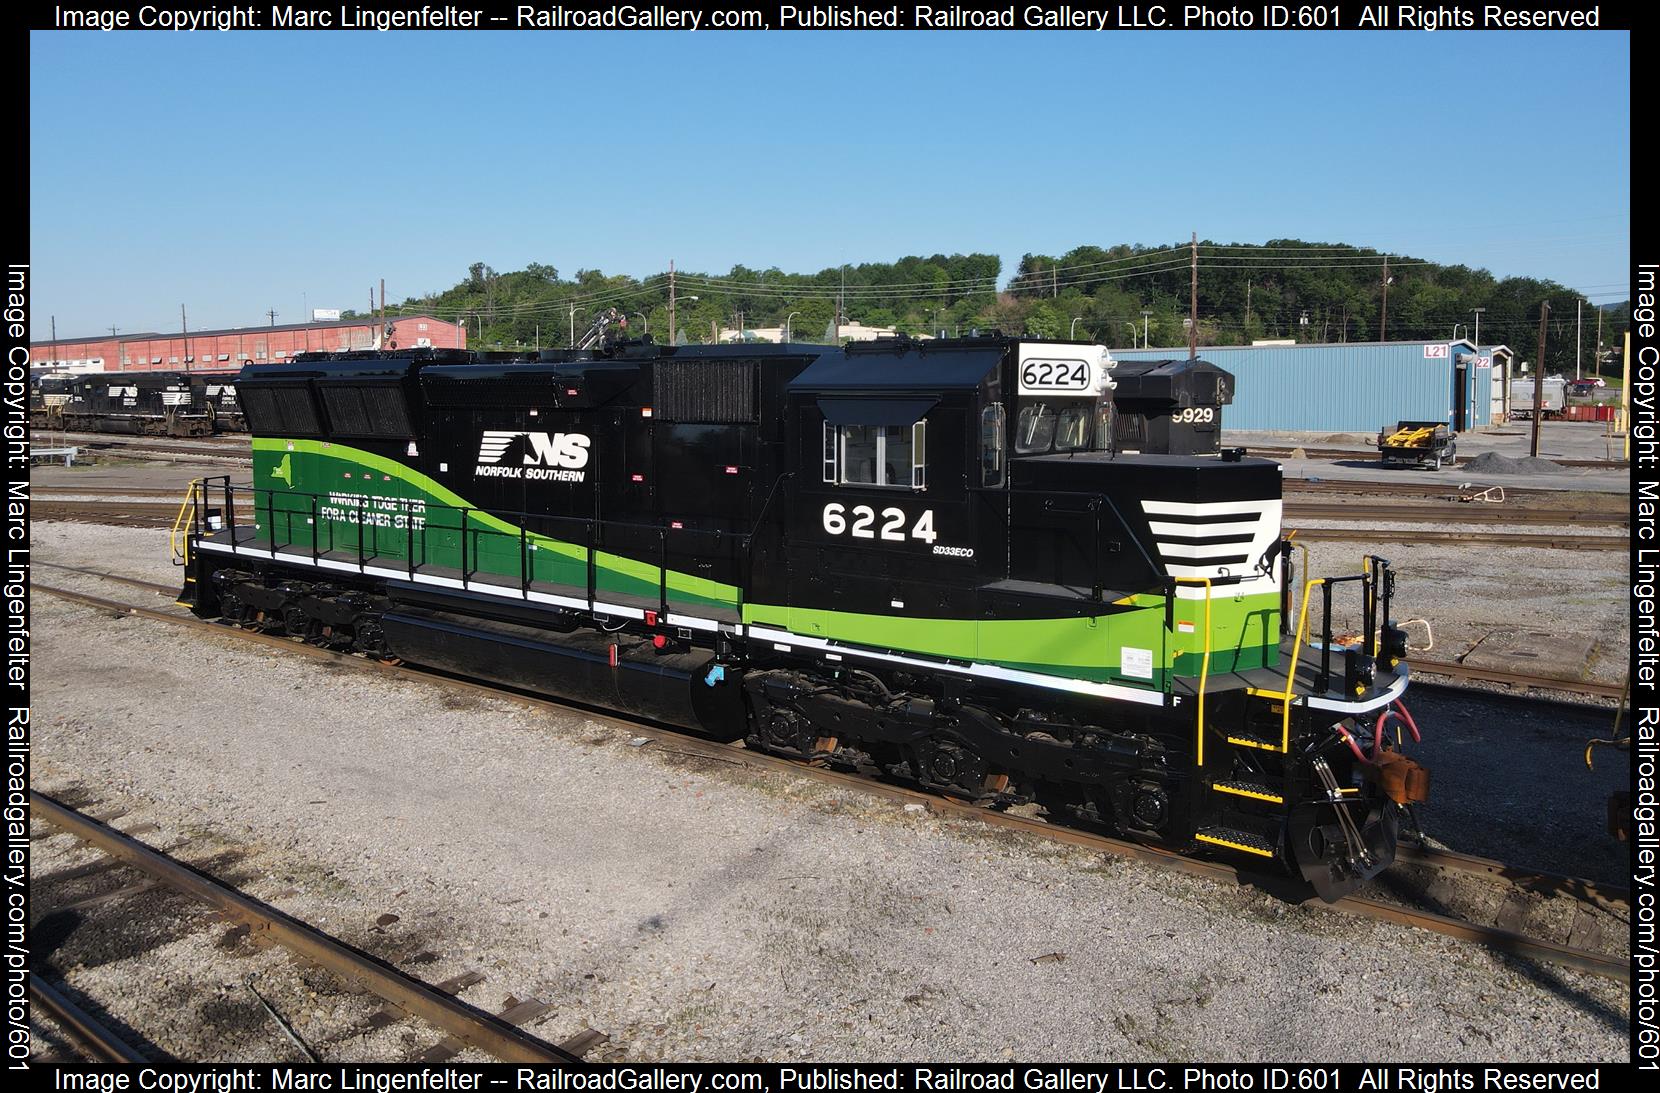 NS 6224 is a class EMD SD33ECO and  is pictured in Altoona, Pennsylvania, USA.  This was taken along the NS Jumiata Shops on the Norfolk Southern. Photo Copyright: Marc Lingenfelter uploaded to Railroad Gallery on 01/20/2023. This photograph of NS 6224 was taken on Monday, June 14, 2021. All Rights Reserved. 